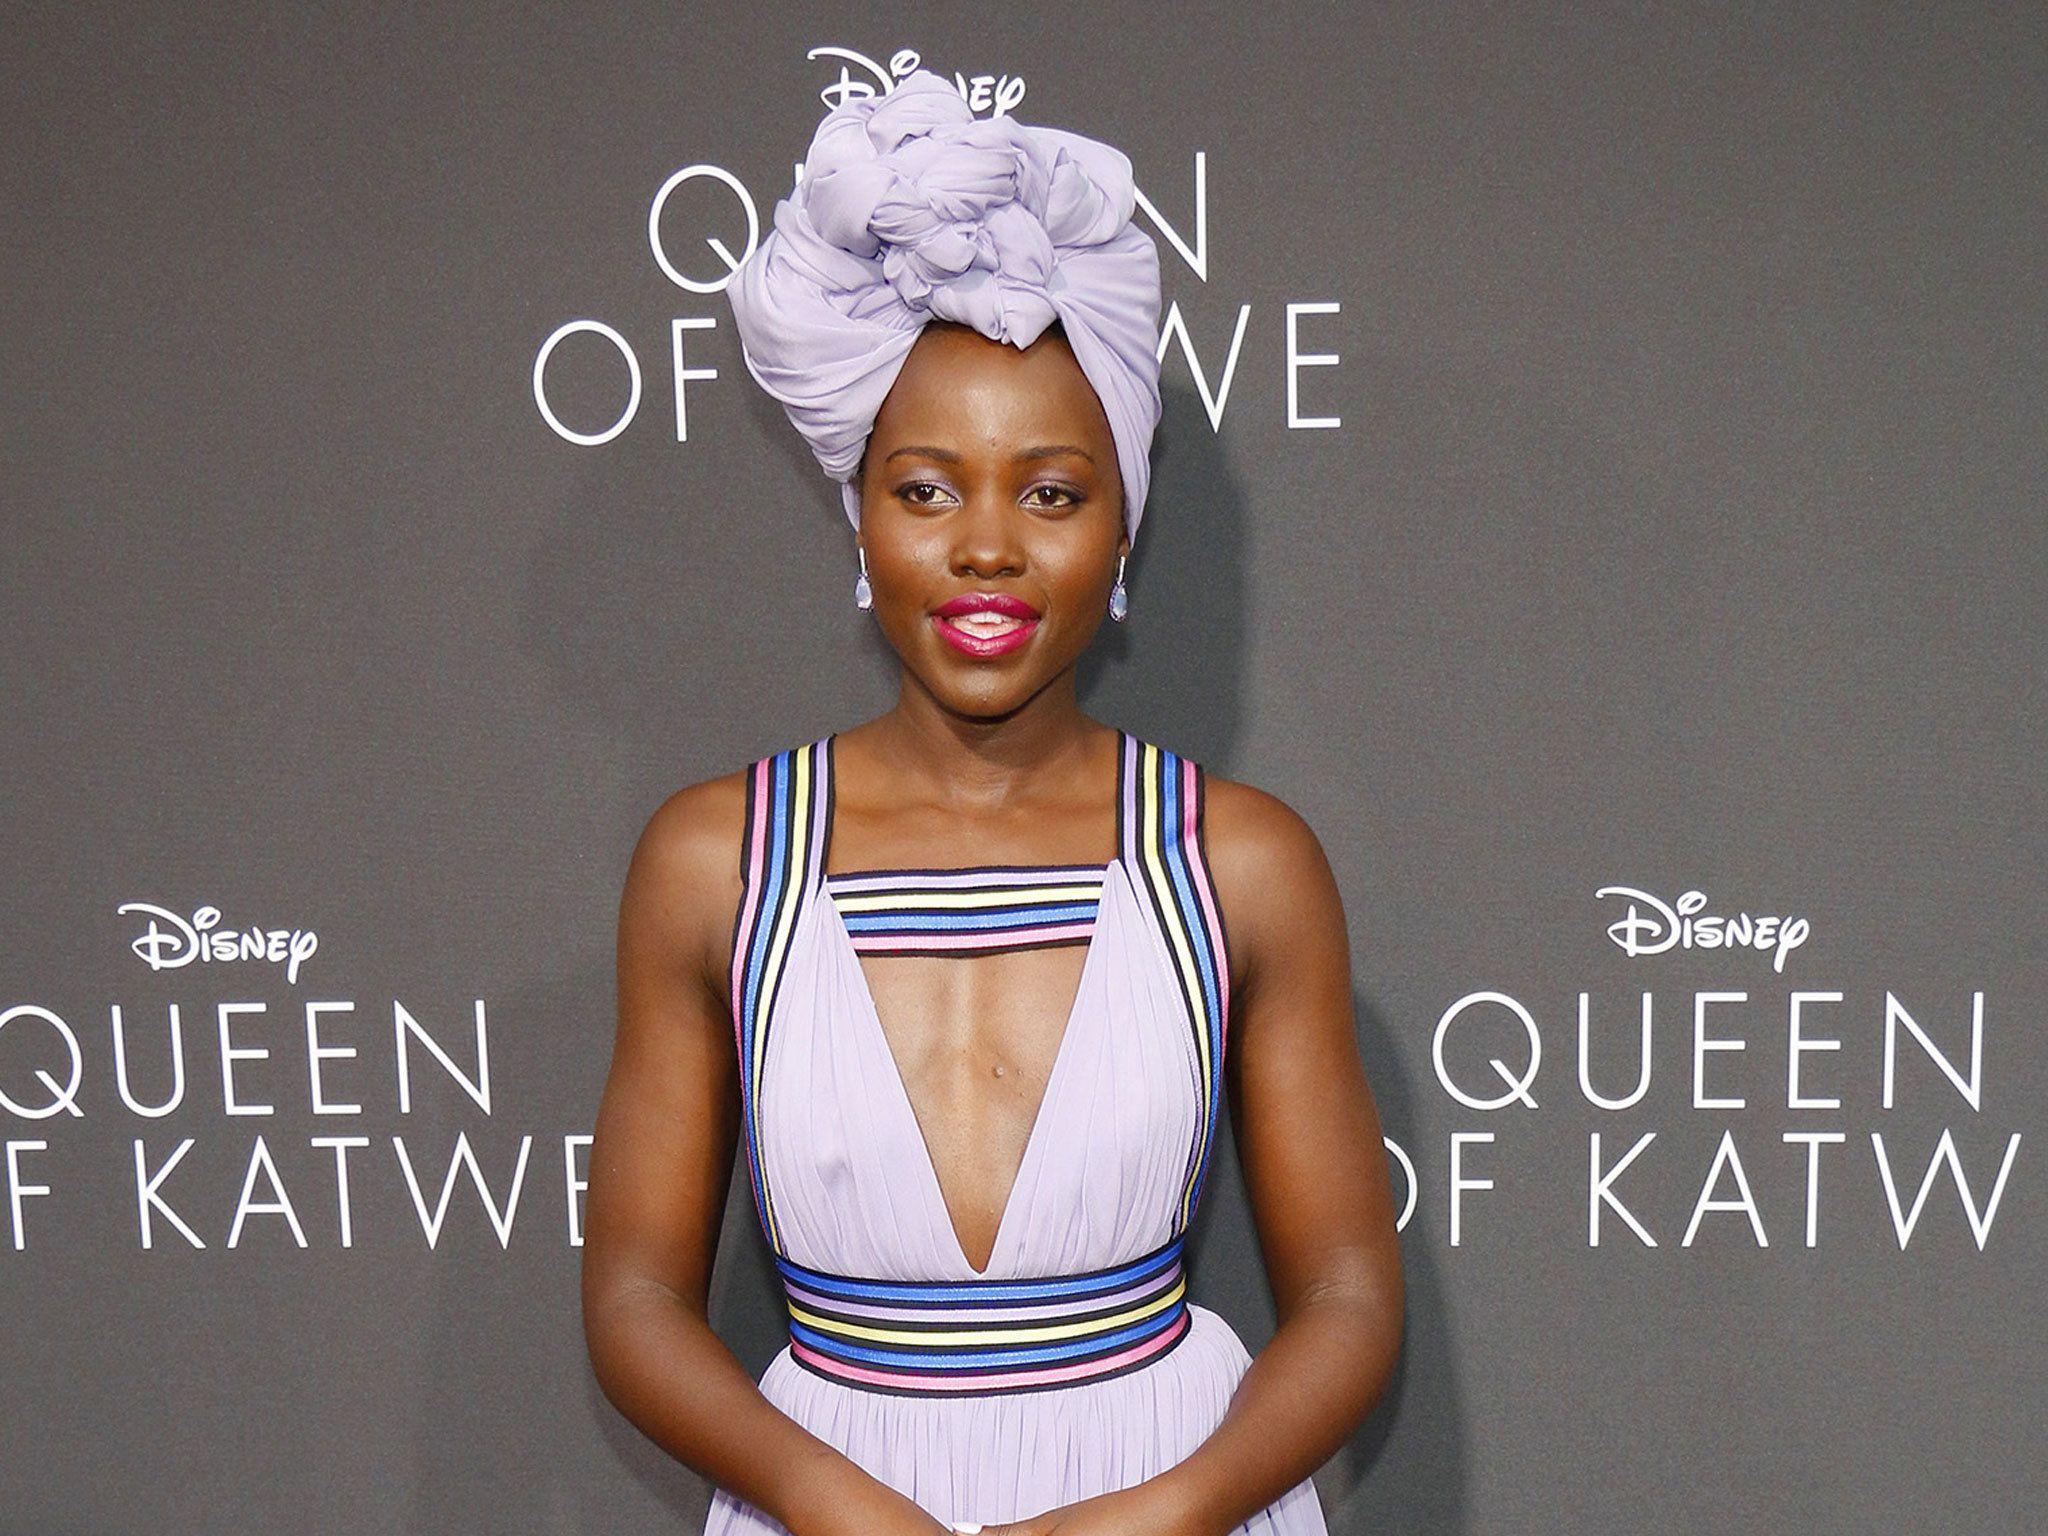 Years a Slave' star Lupita Nyong'o on #OscarsSoWhite and her